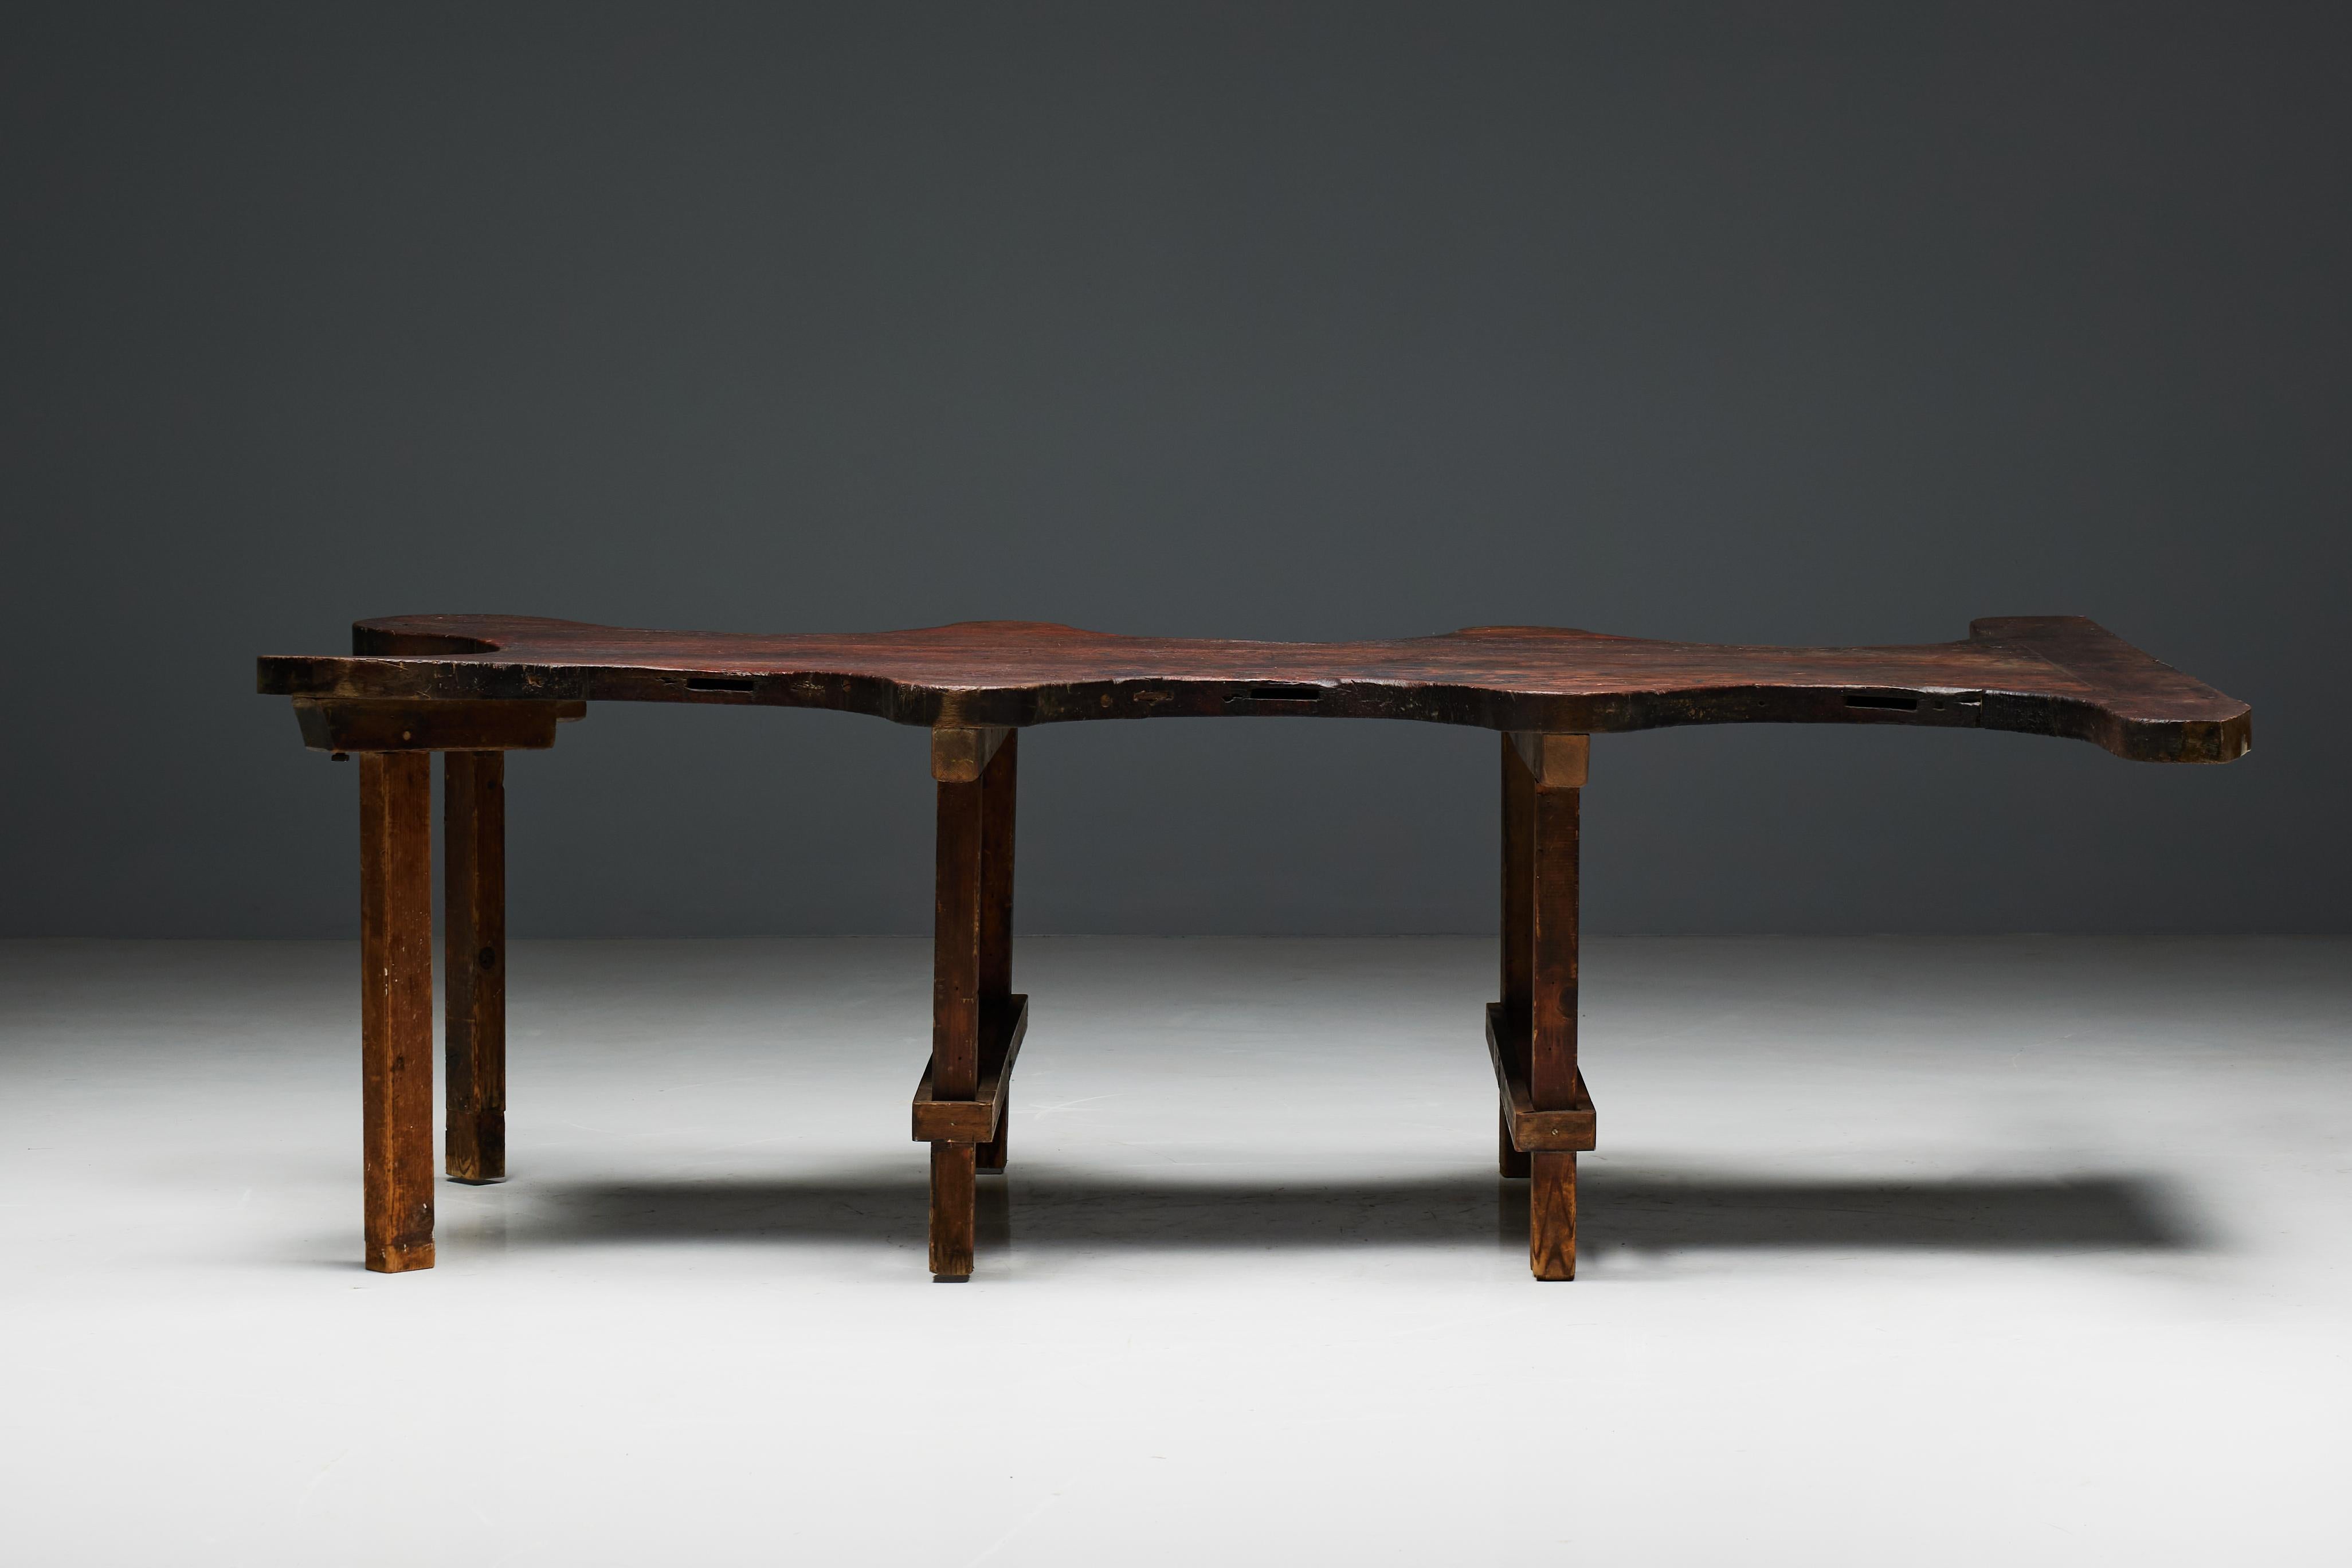 Rustic Free Form Organic Table, France, Late 19th Century For Sale 1